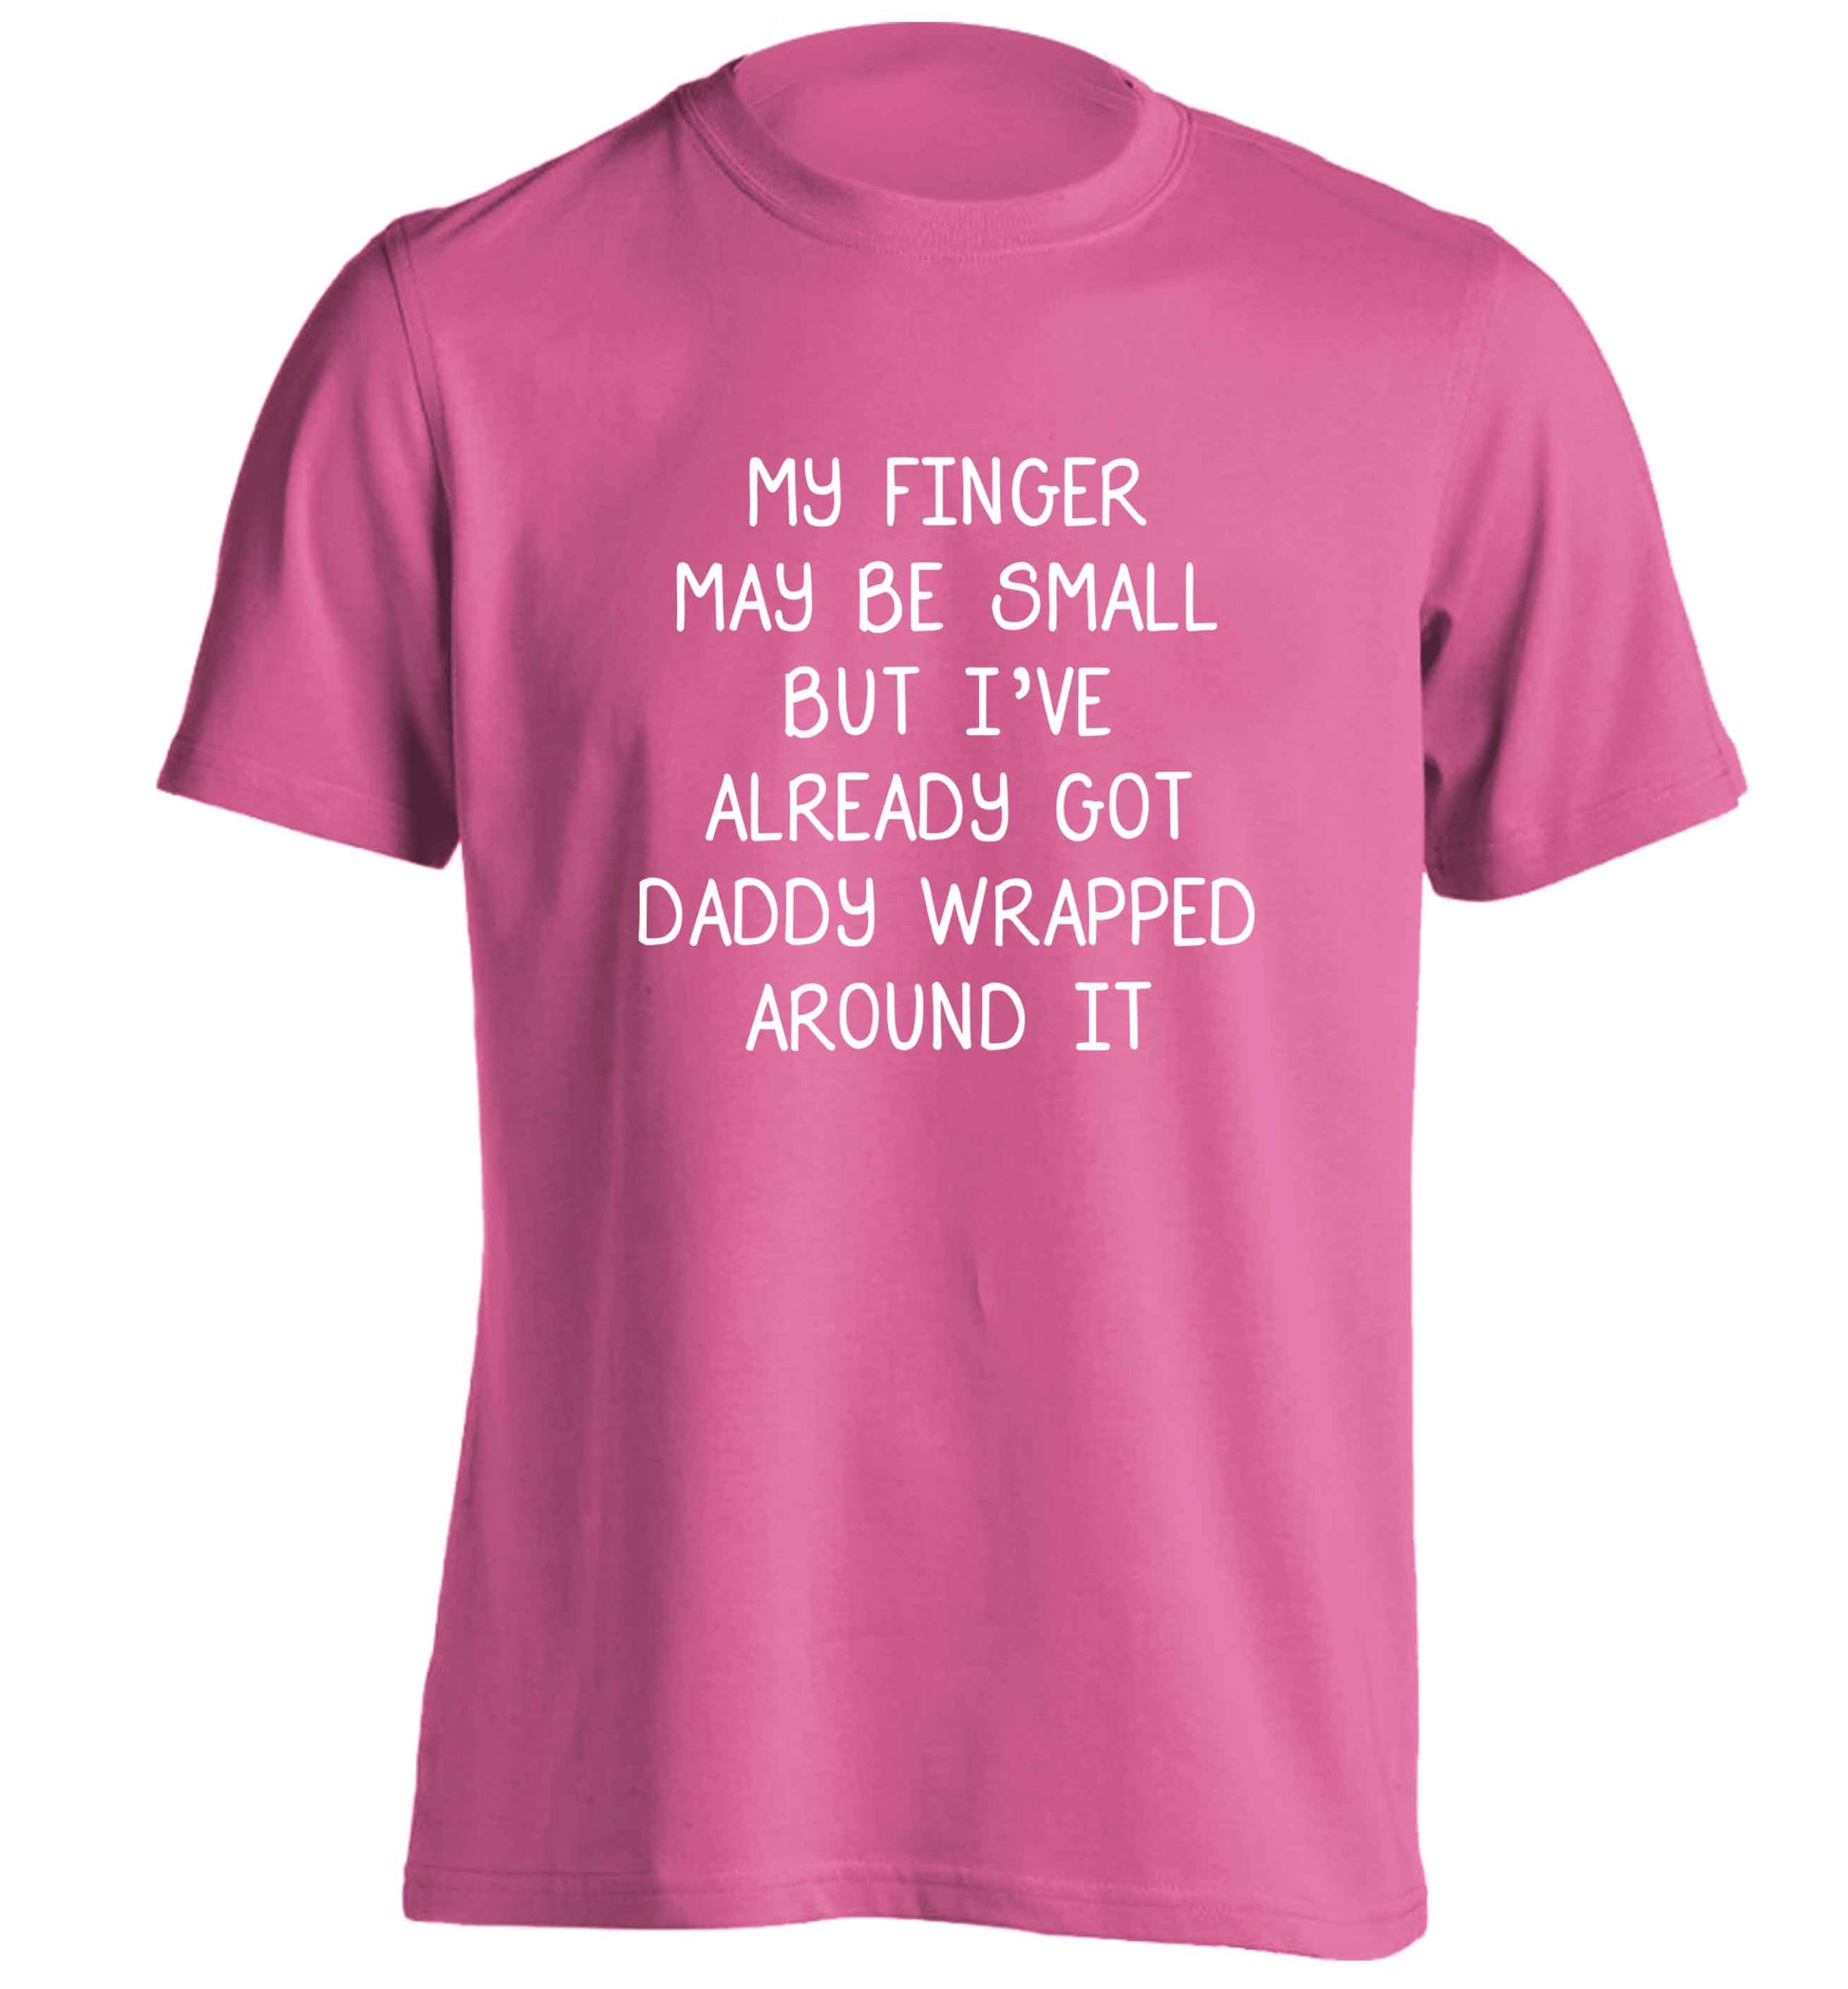 My finger may be small but I've already got daddy wrapped around it adults unisex pink Tshirt 2XL